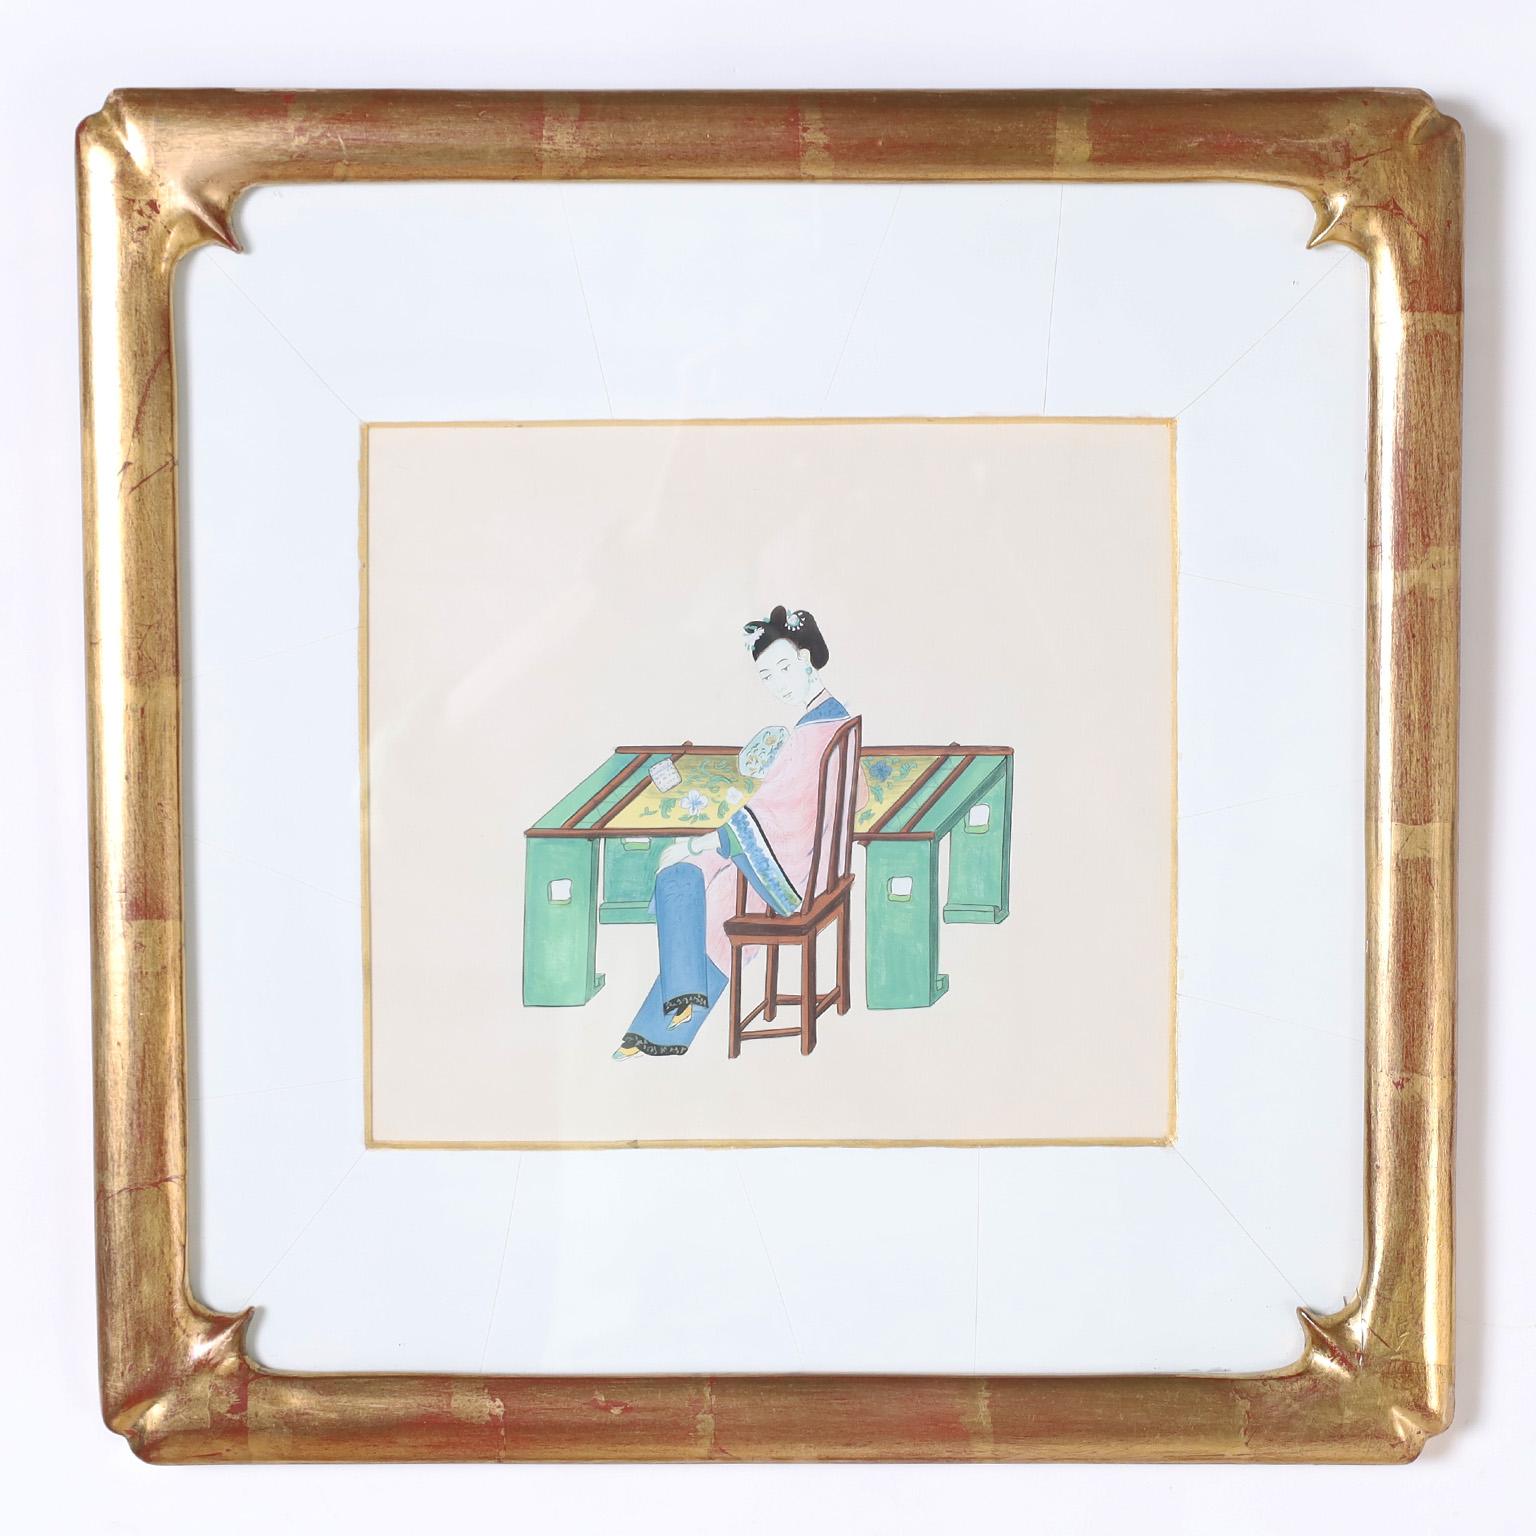 Rare antique set of eight Chinese watercolors depicting women in various occupations executed in a traditional delicate style on pith. Presented in a gilt carved wood Asian style frame under glass.